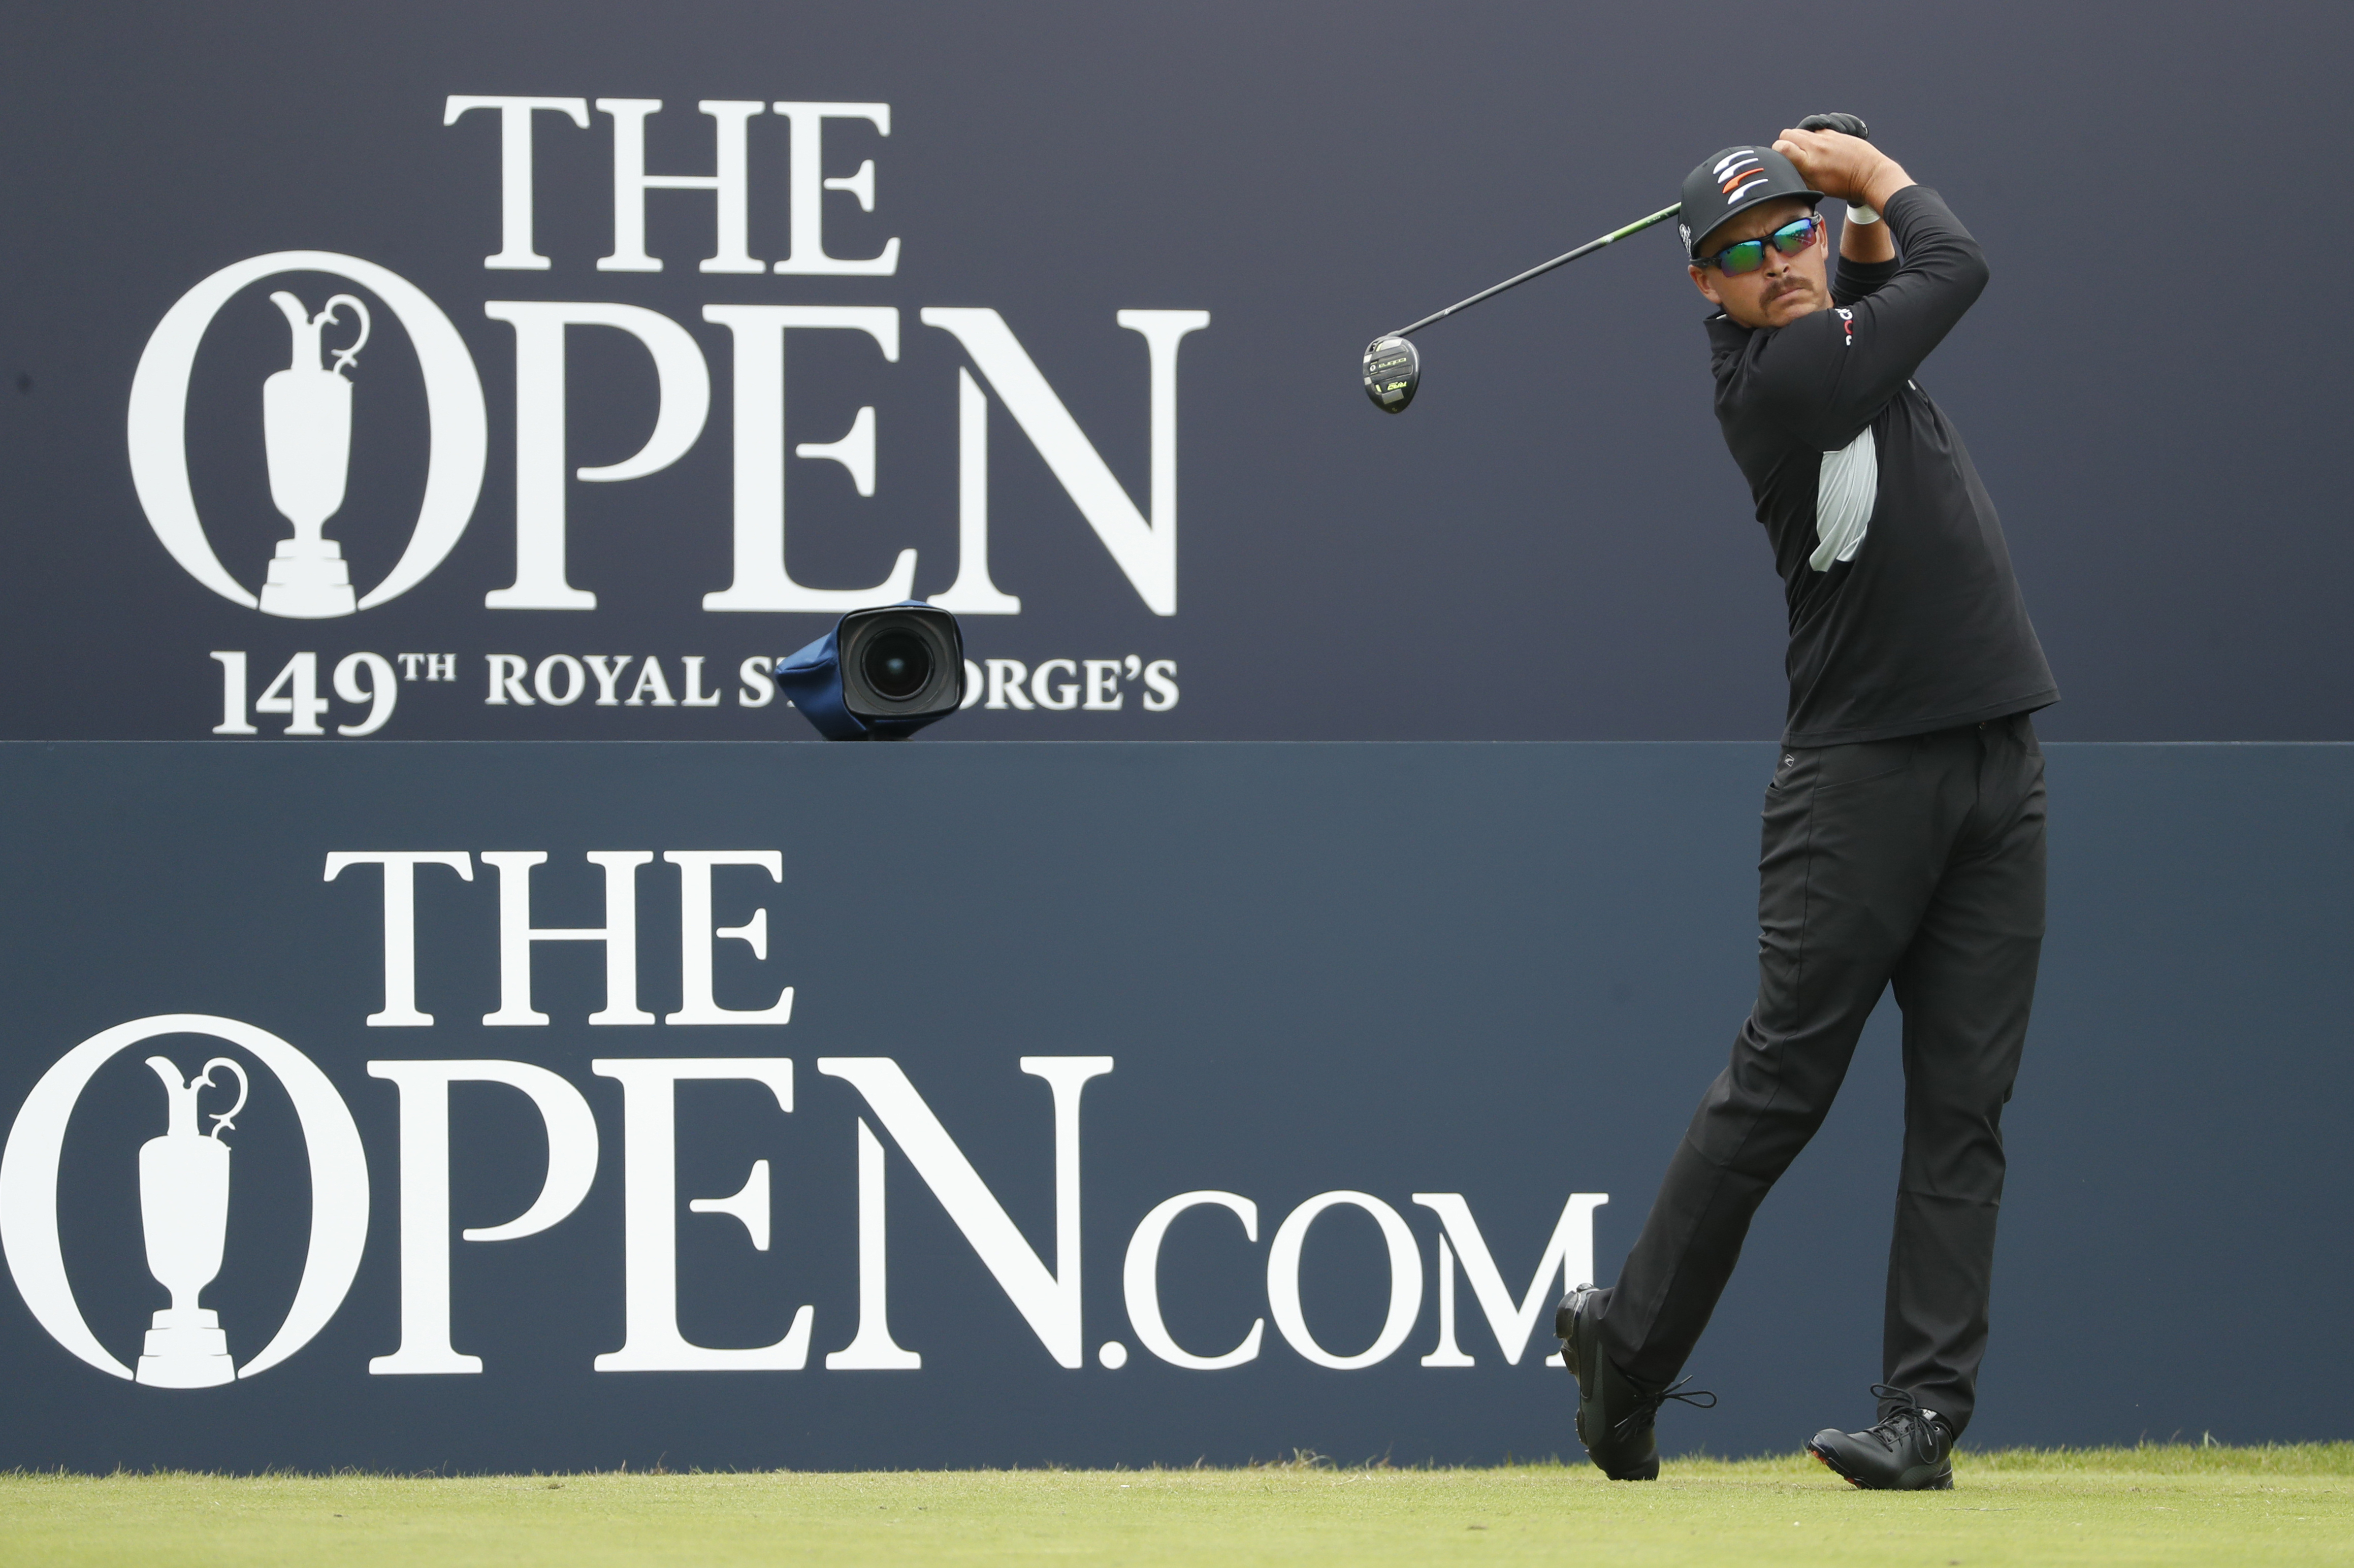 British Open Championship live stream (7/15) How to watch online, TV, time, tee times